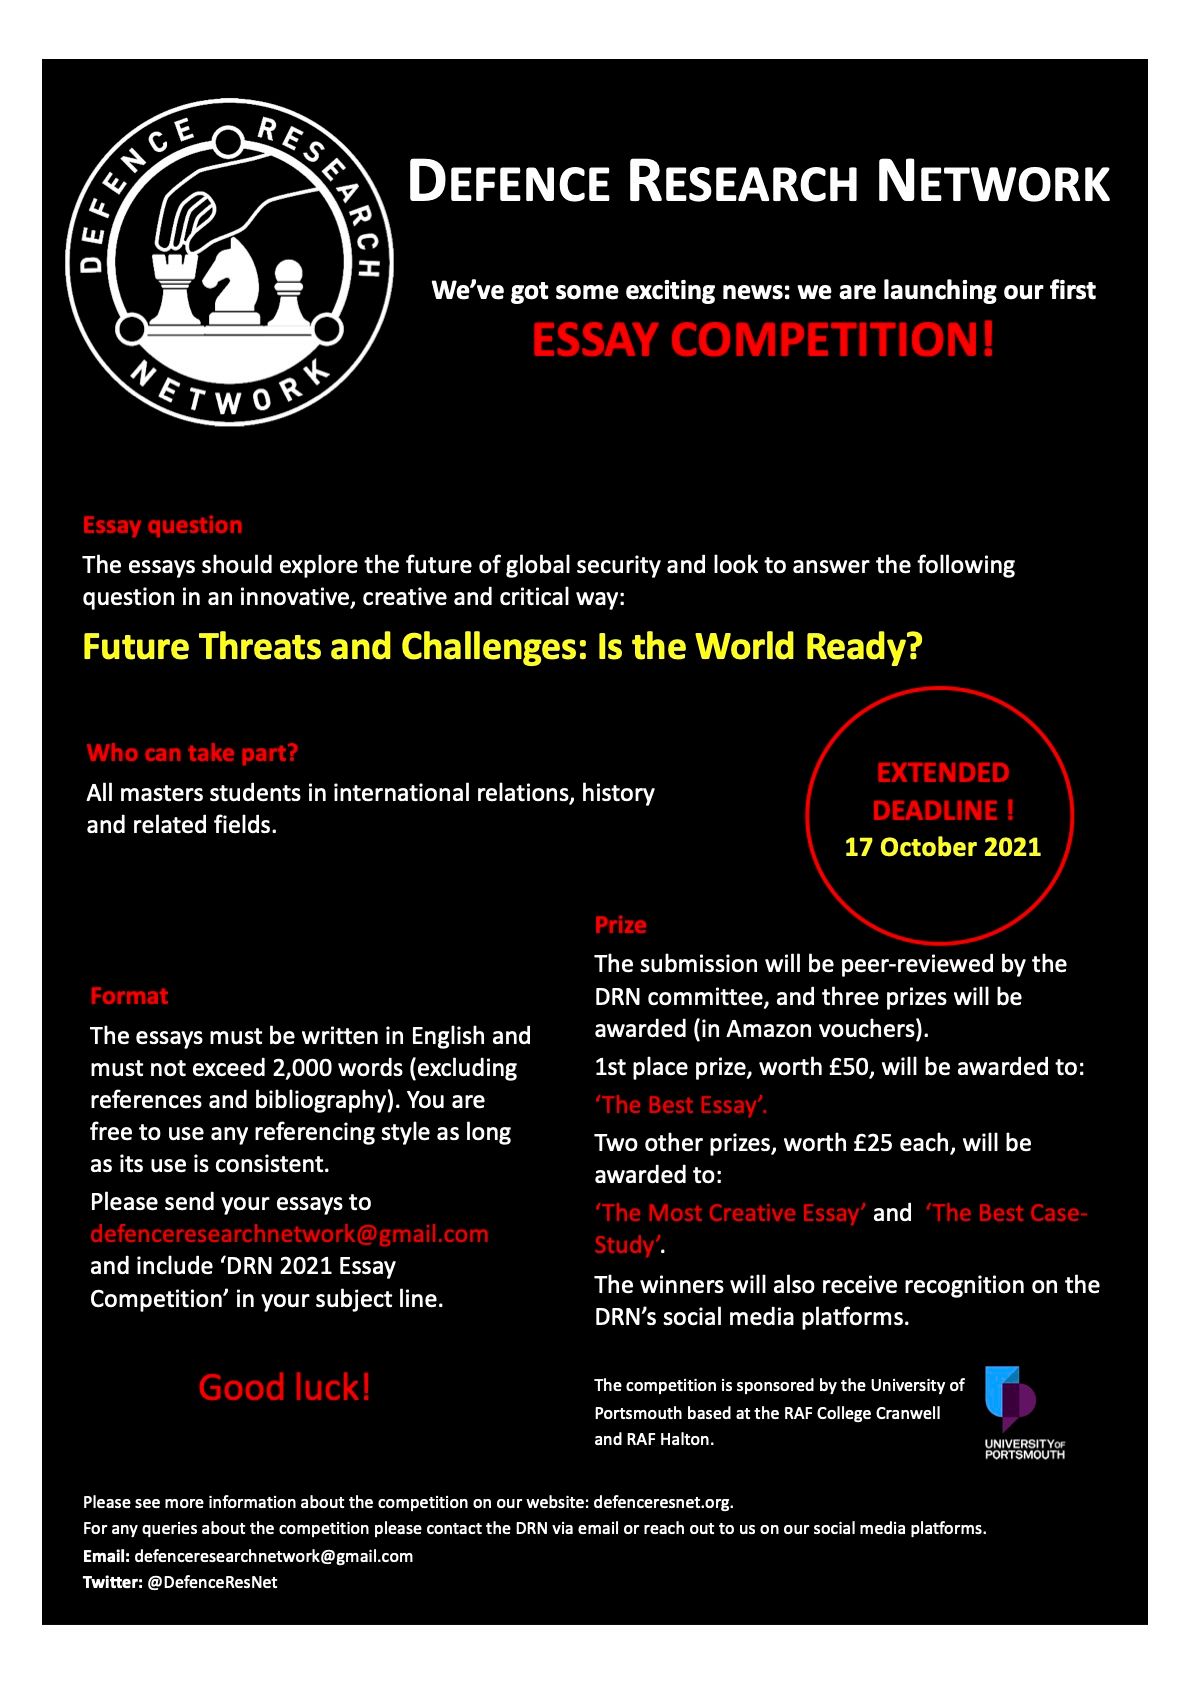 EXTENDED DEADLINE: DRN Essay Competition 2021 • Future Threats & Challenges: Is the World Ready?